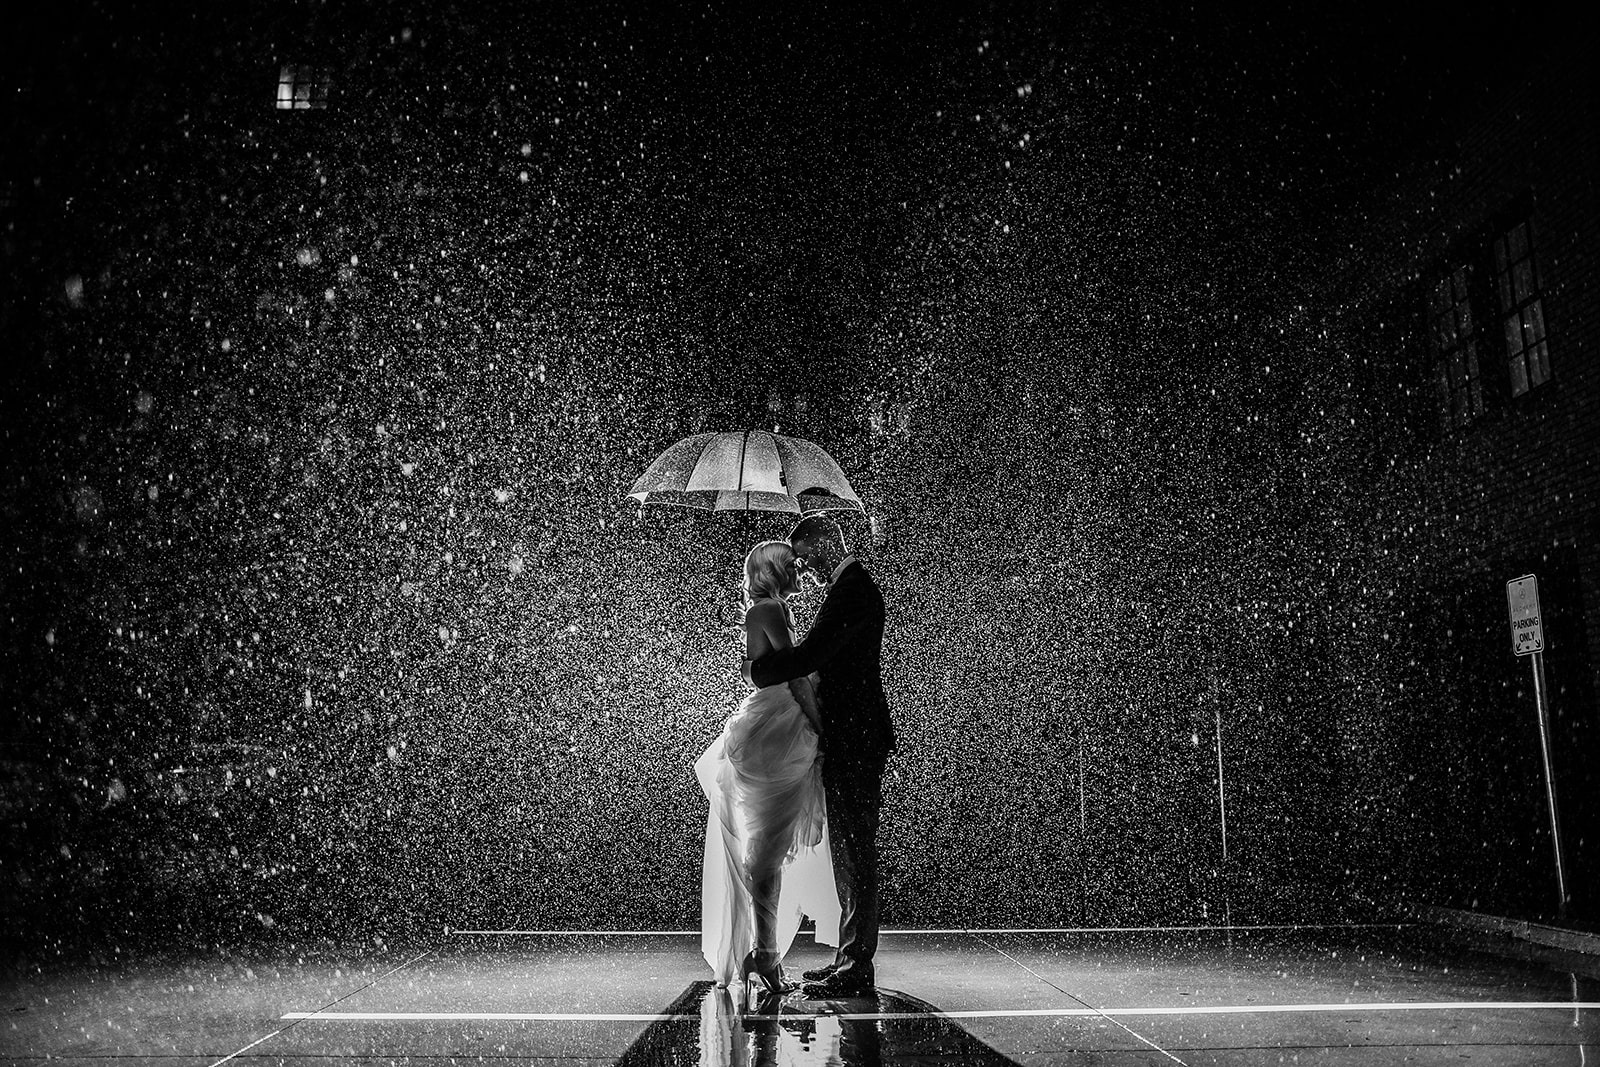 A bride and groom holding each other under an umbrella as it rains